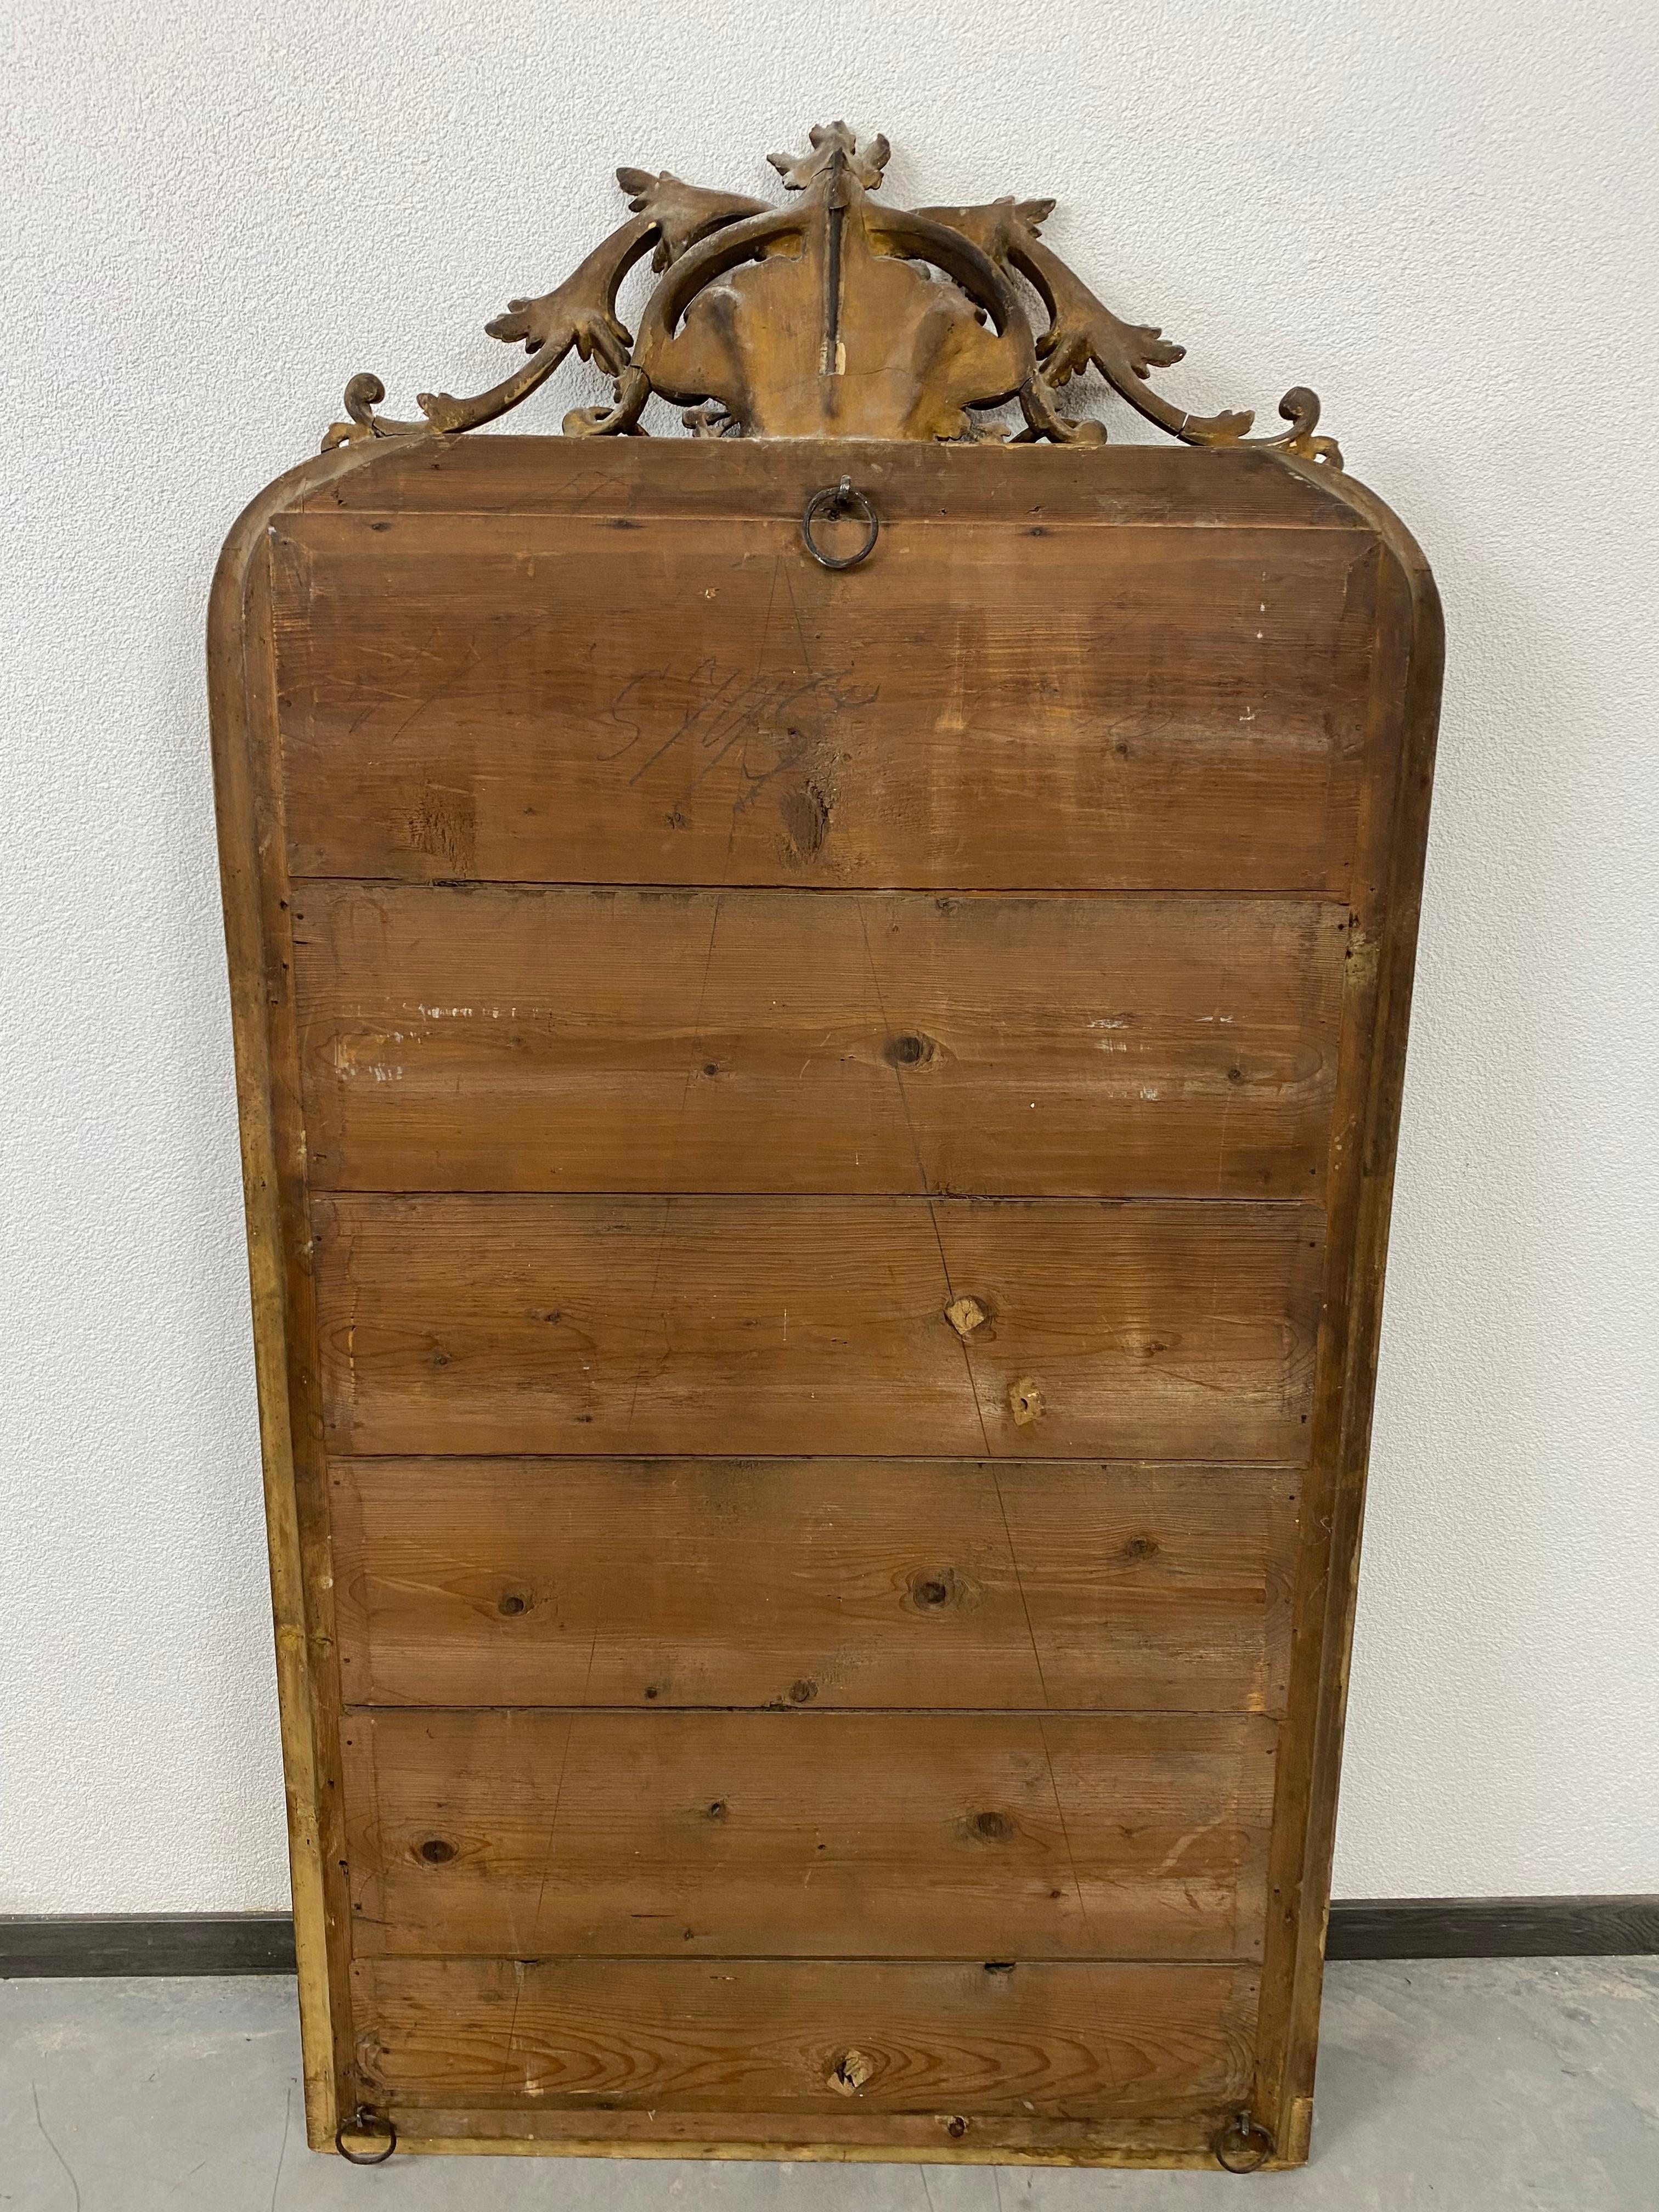 Large Rococo style wall mirror circa 1850 in original condition with signs of usage.